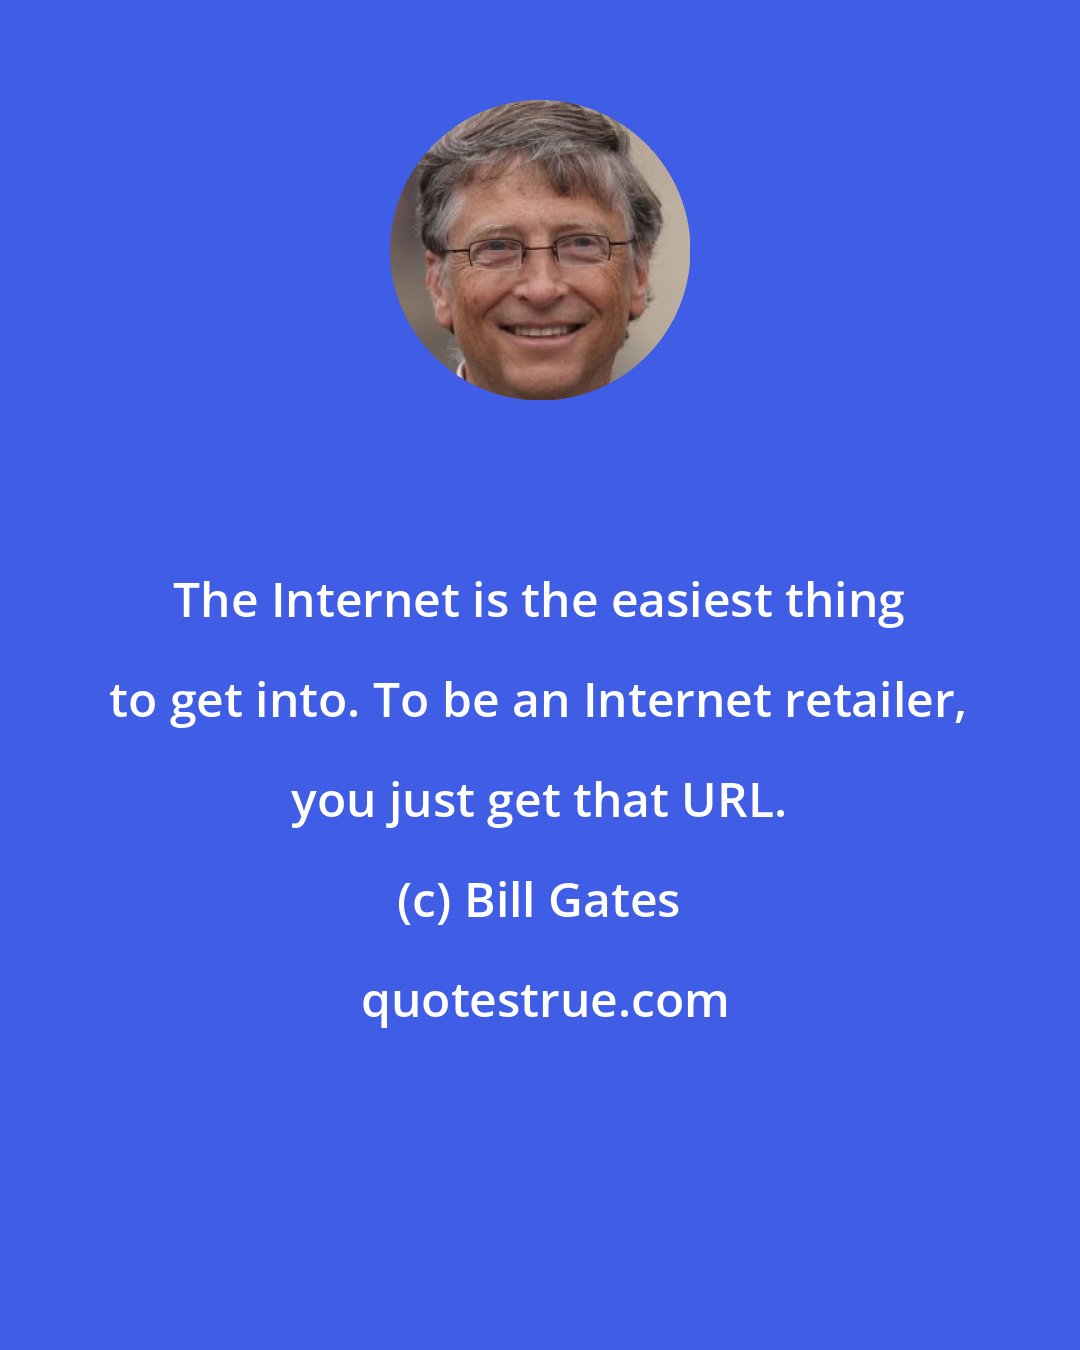 Bill Gates: The Internet is the easiest thing to get into. To be an Internet retailer, you just get that URL.